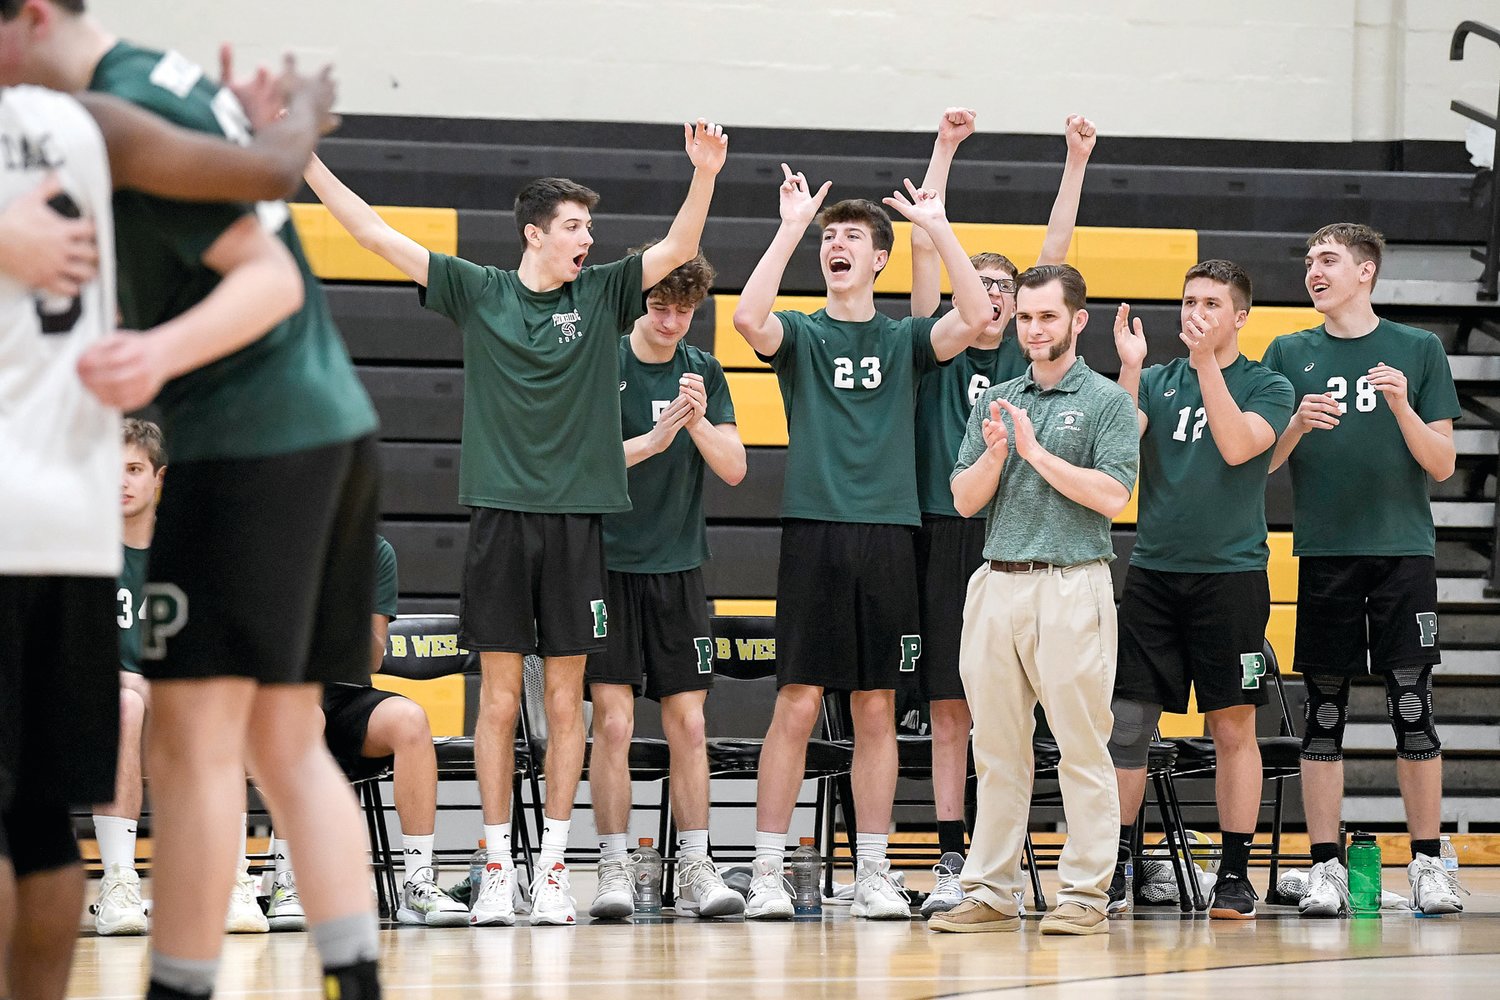 The Pennridge bench of mostly starters reacts to the backups taking the lead late in the third set.